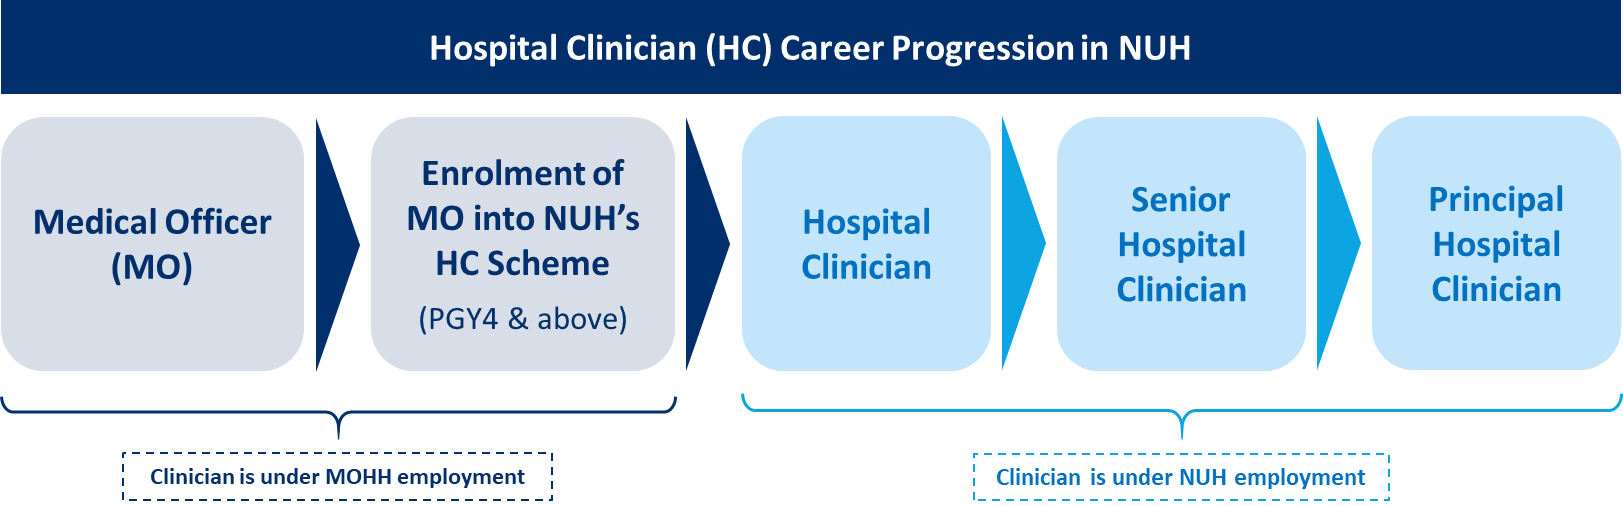 Hospital Clinician Career Track.png